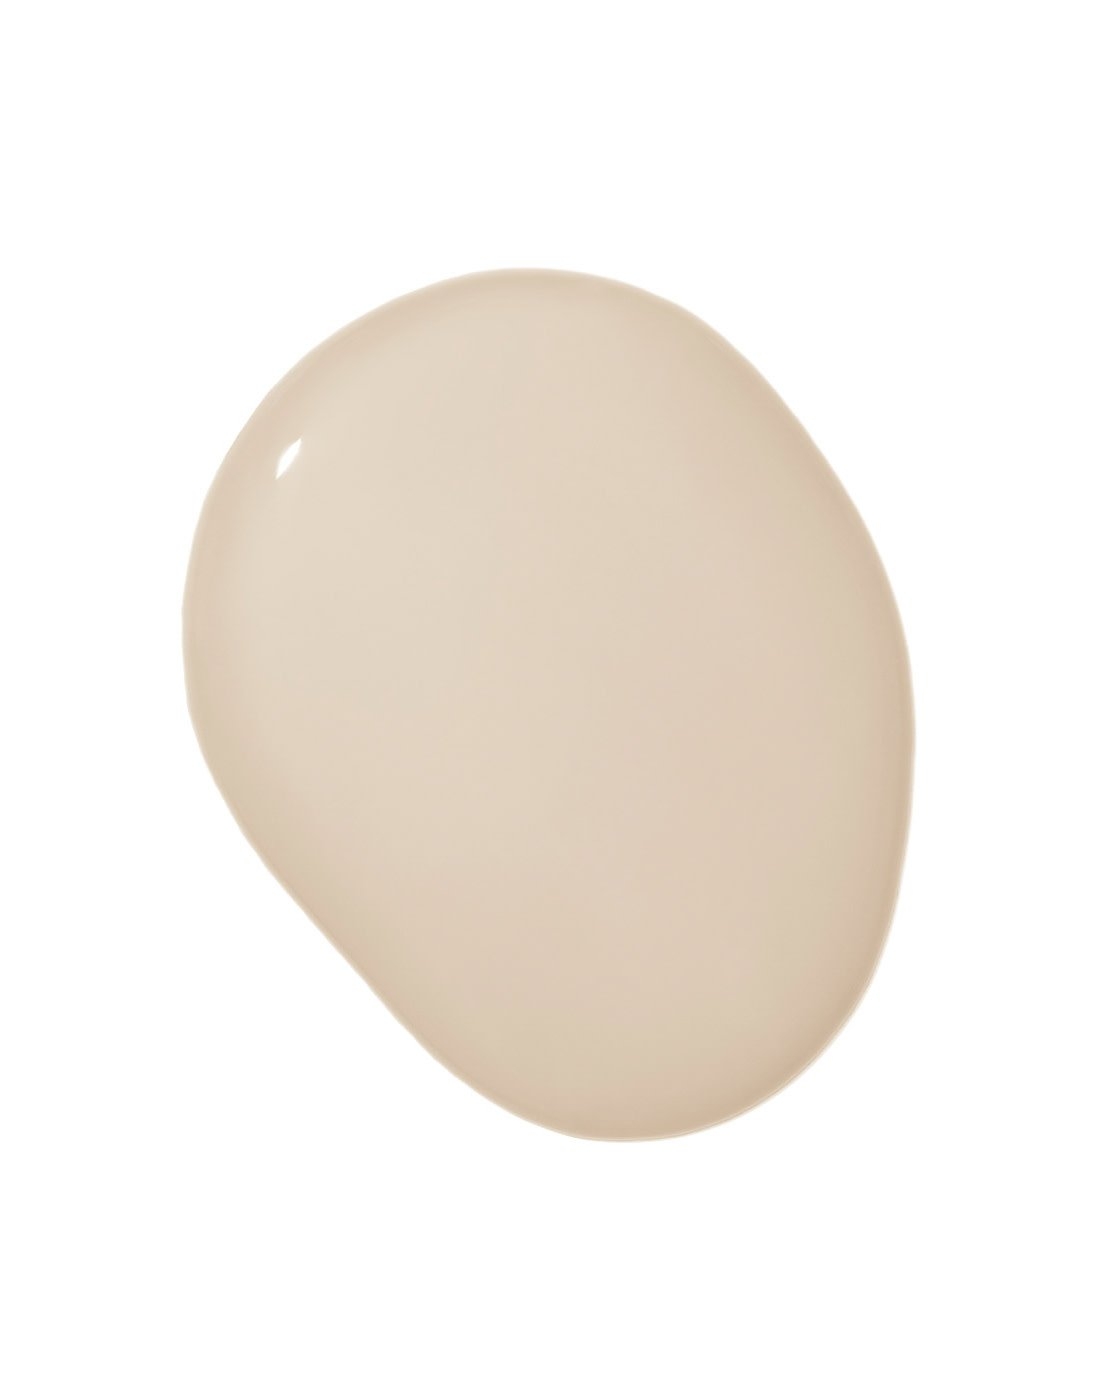 Clare Paint - Neutral Territory - Wall Swatch - Image 0